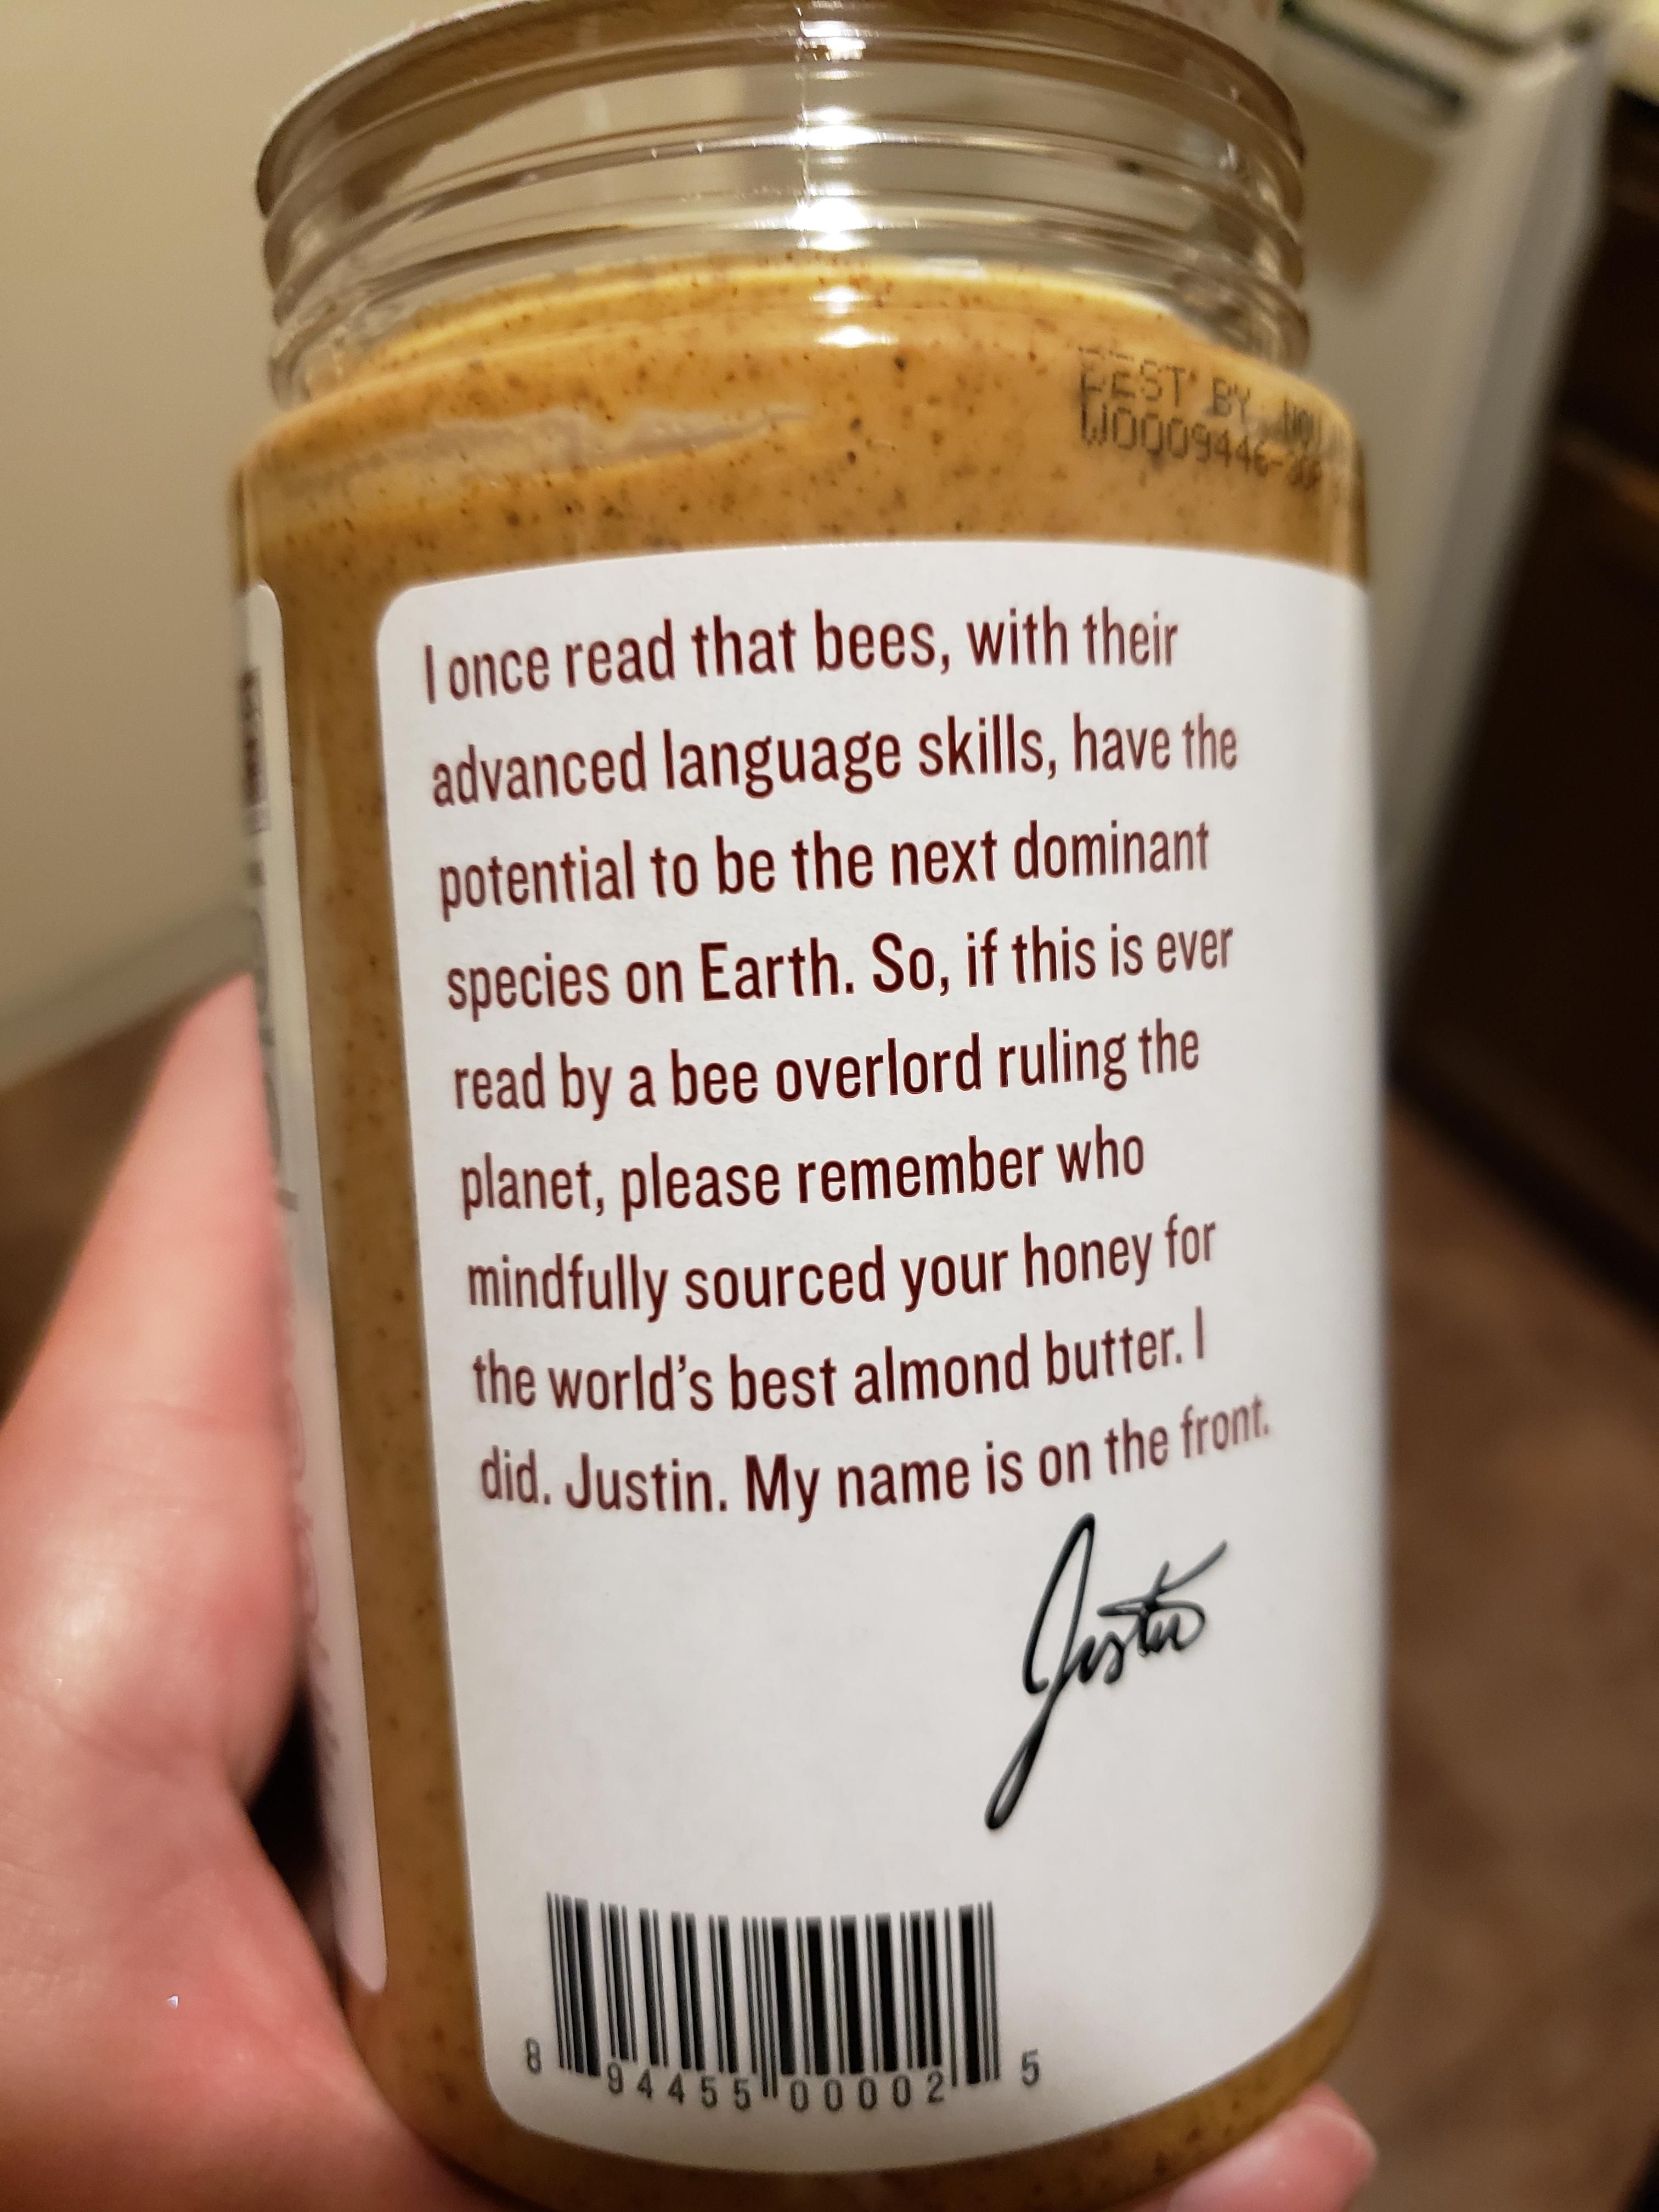 Saw this on the side of my almond butter today. Justin will be fine when the bees come.